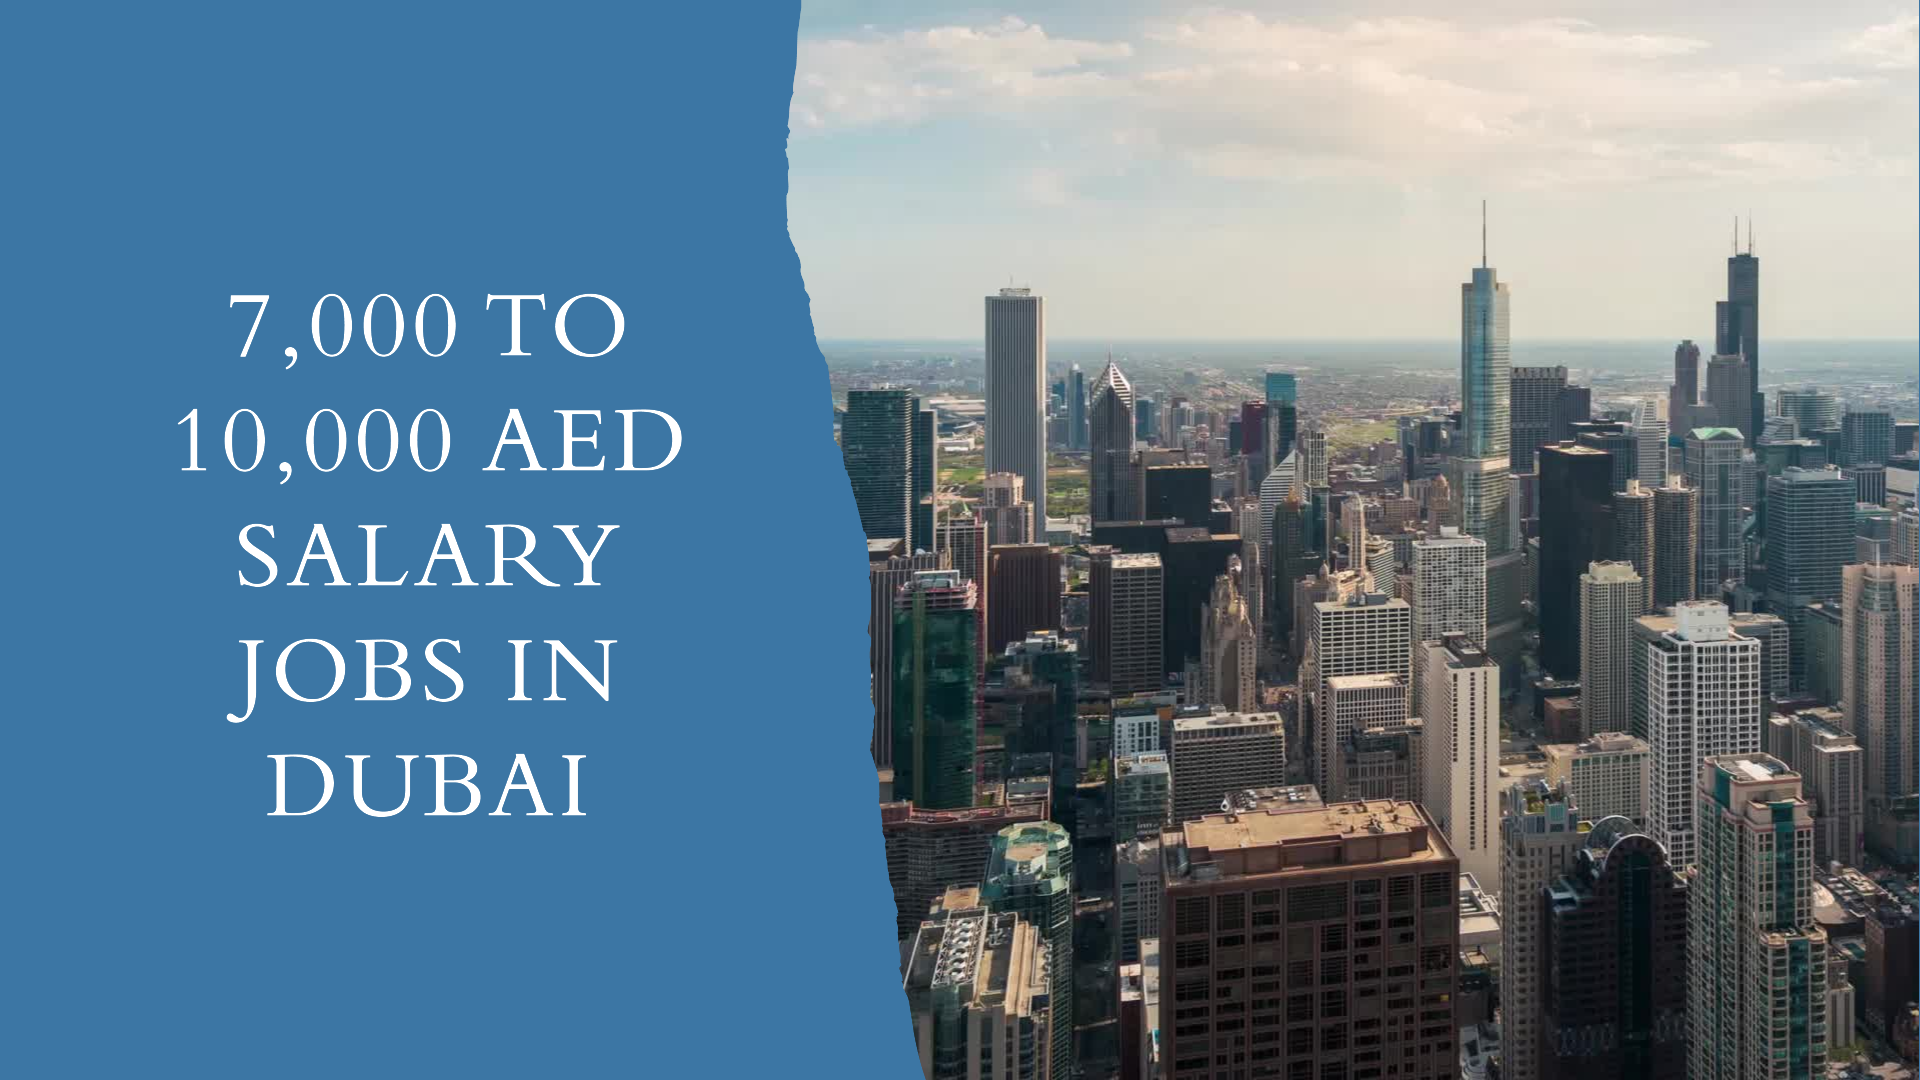 7,000 to 10,000 aed salary jobs in dubai